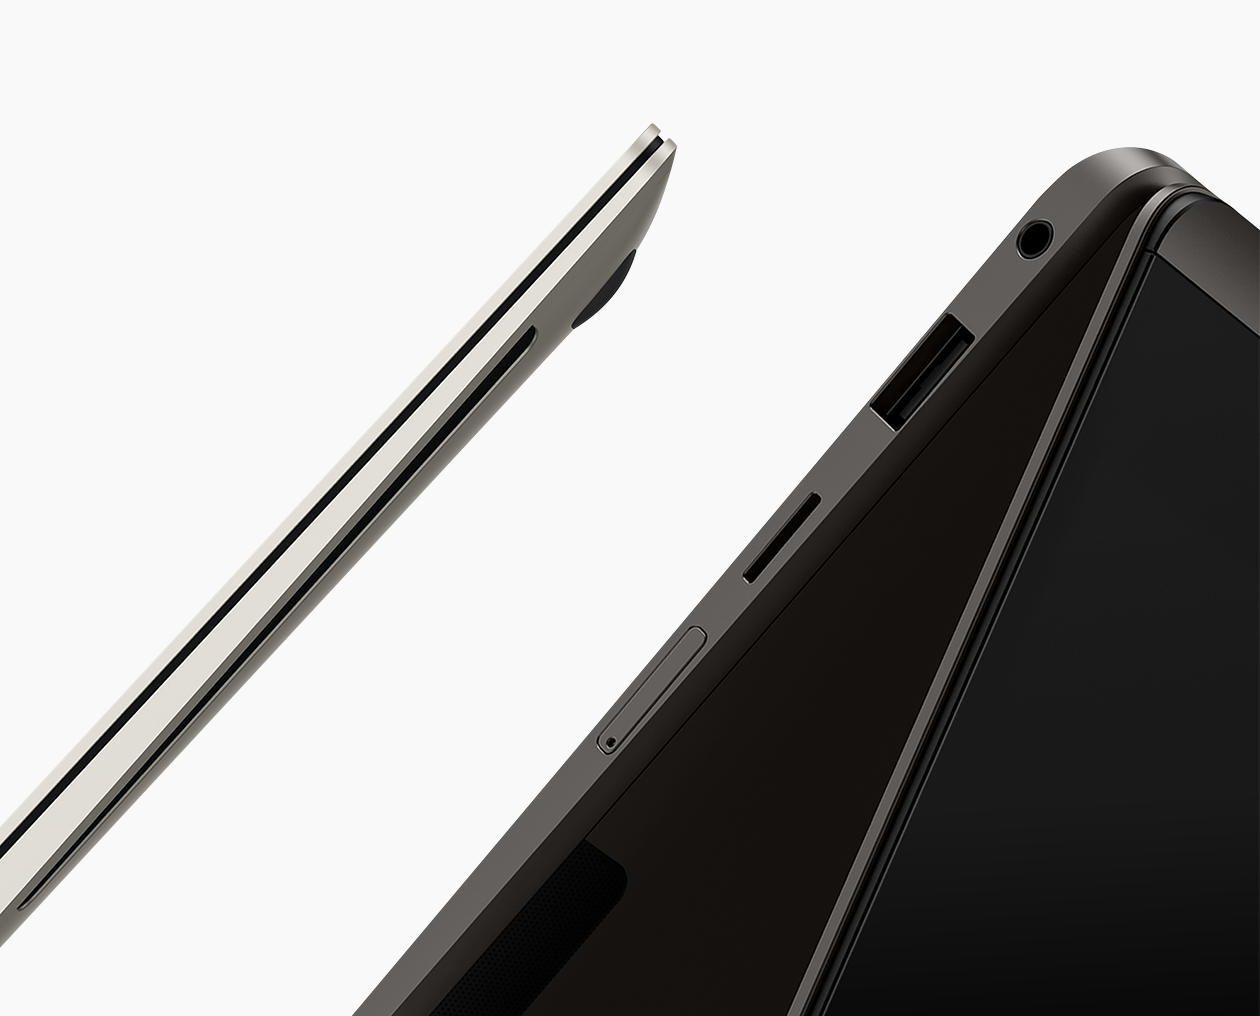 This is the Galaxy Book 3 image describes the minimal form of the aluminum body.